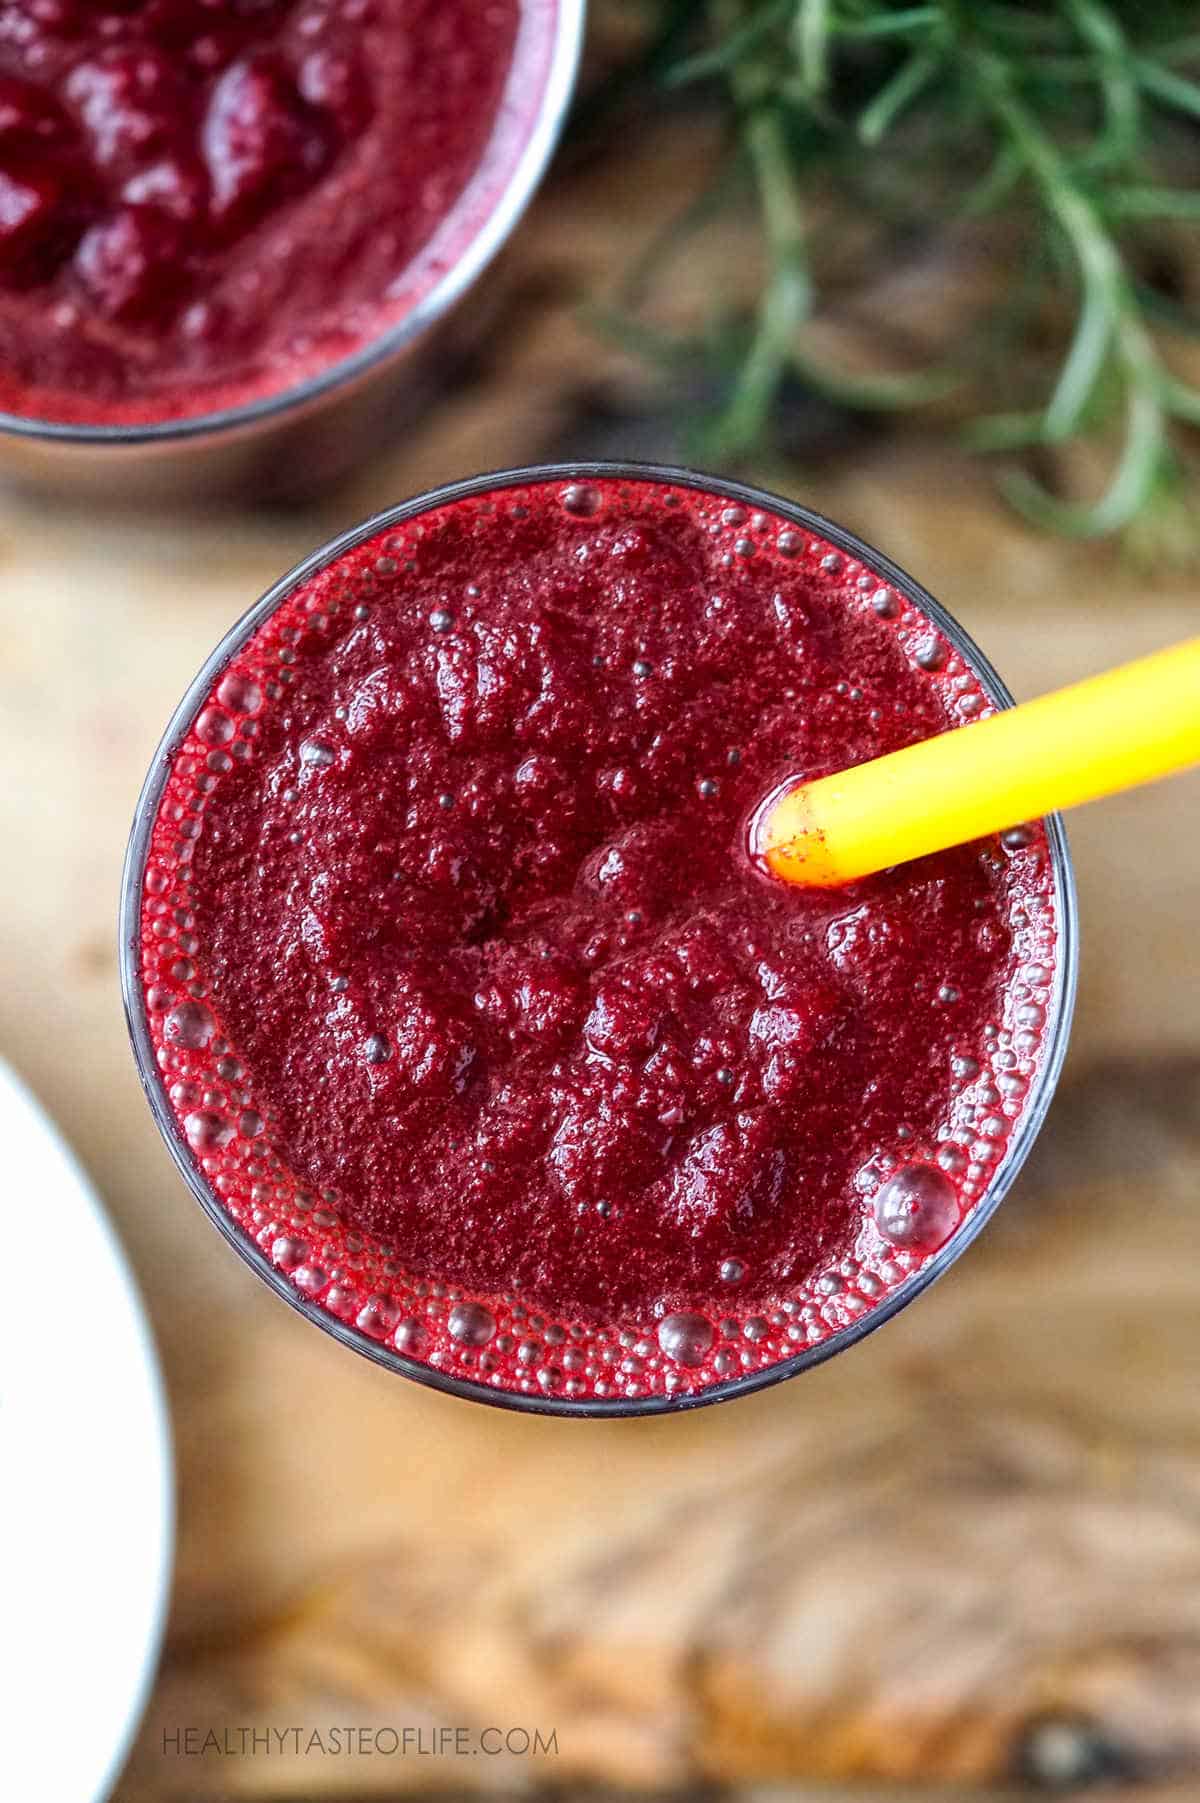 Beet carrot apple smoothie with colon cleanse and liver detoxifying properties #beetsmoothie #applecarrotsmoothie #detoxsmoothies #smoothiedetox